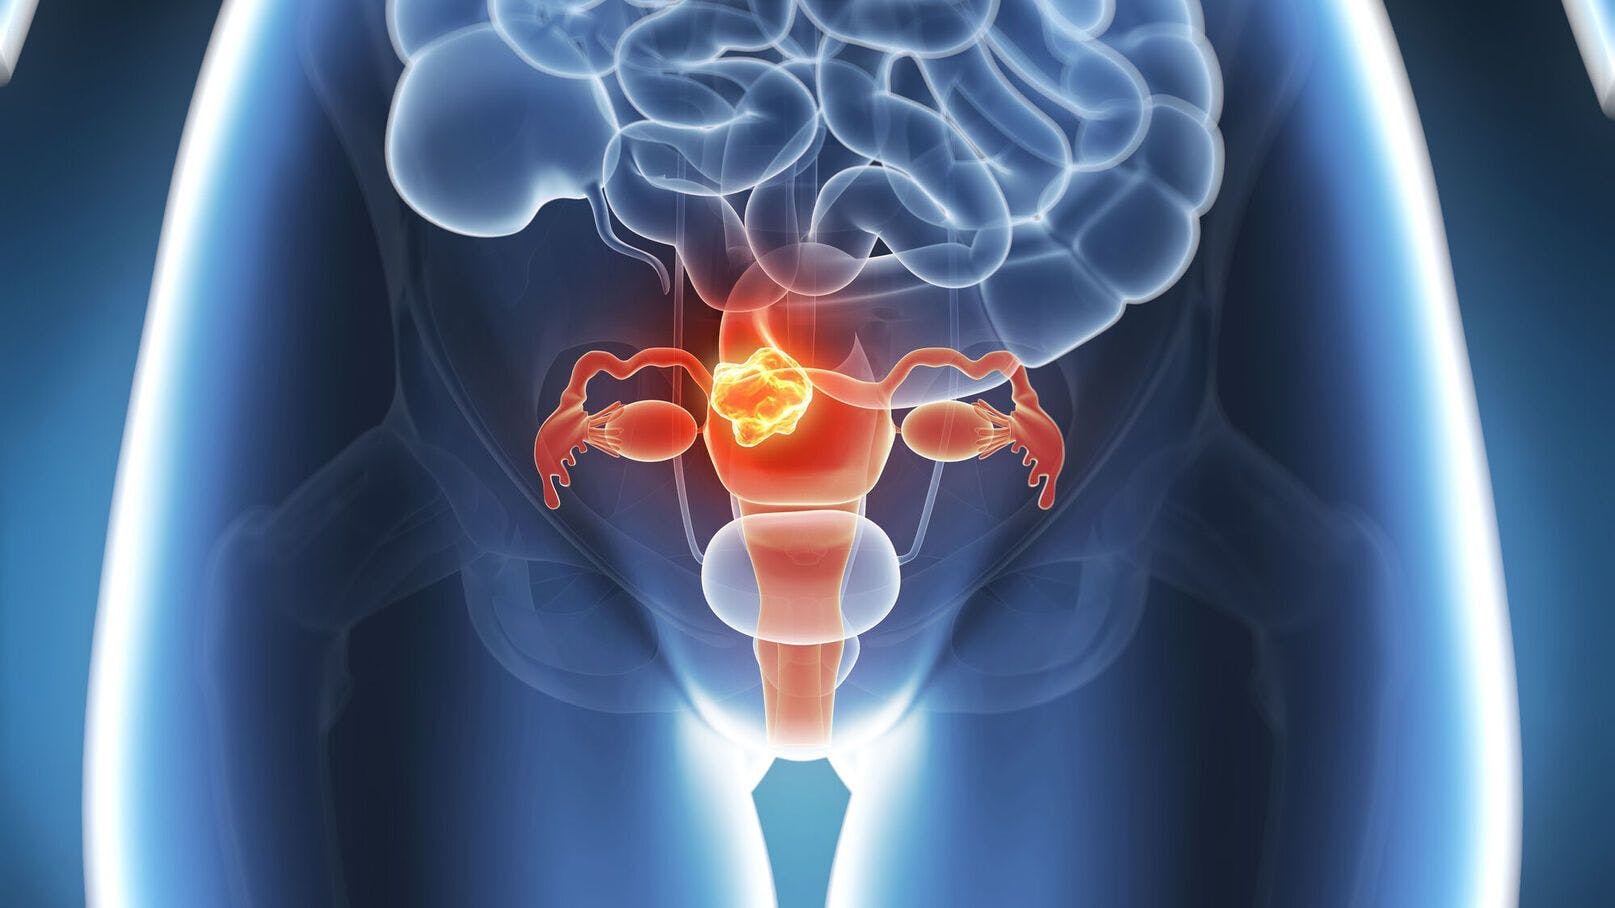 PD-L1 Warrants Further Research as Biomarker for Endometrial Cancer Therapy Response